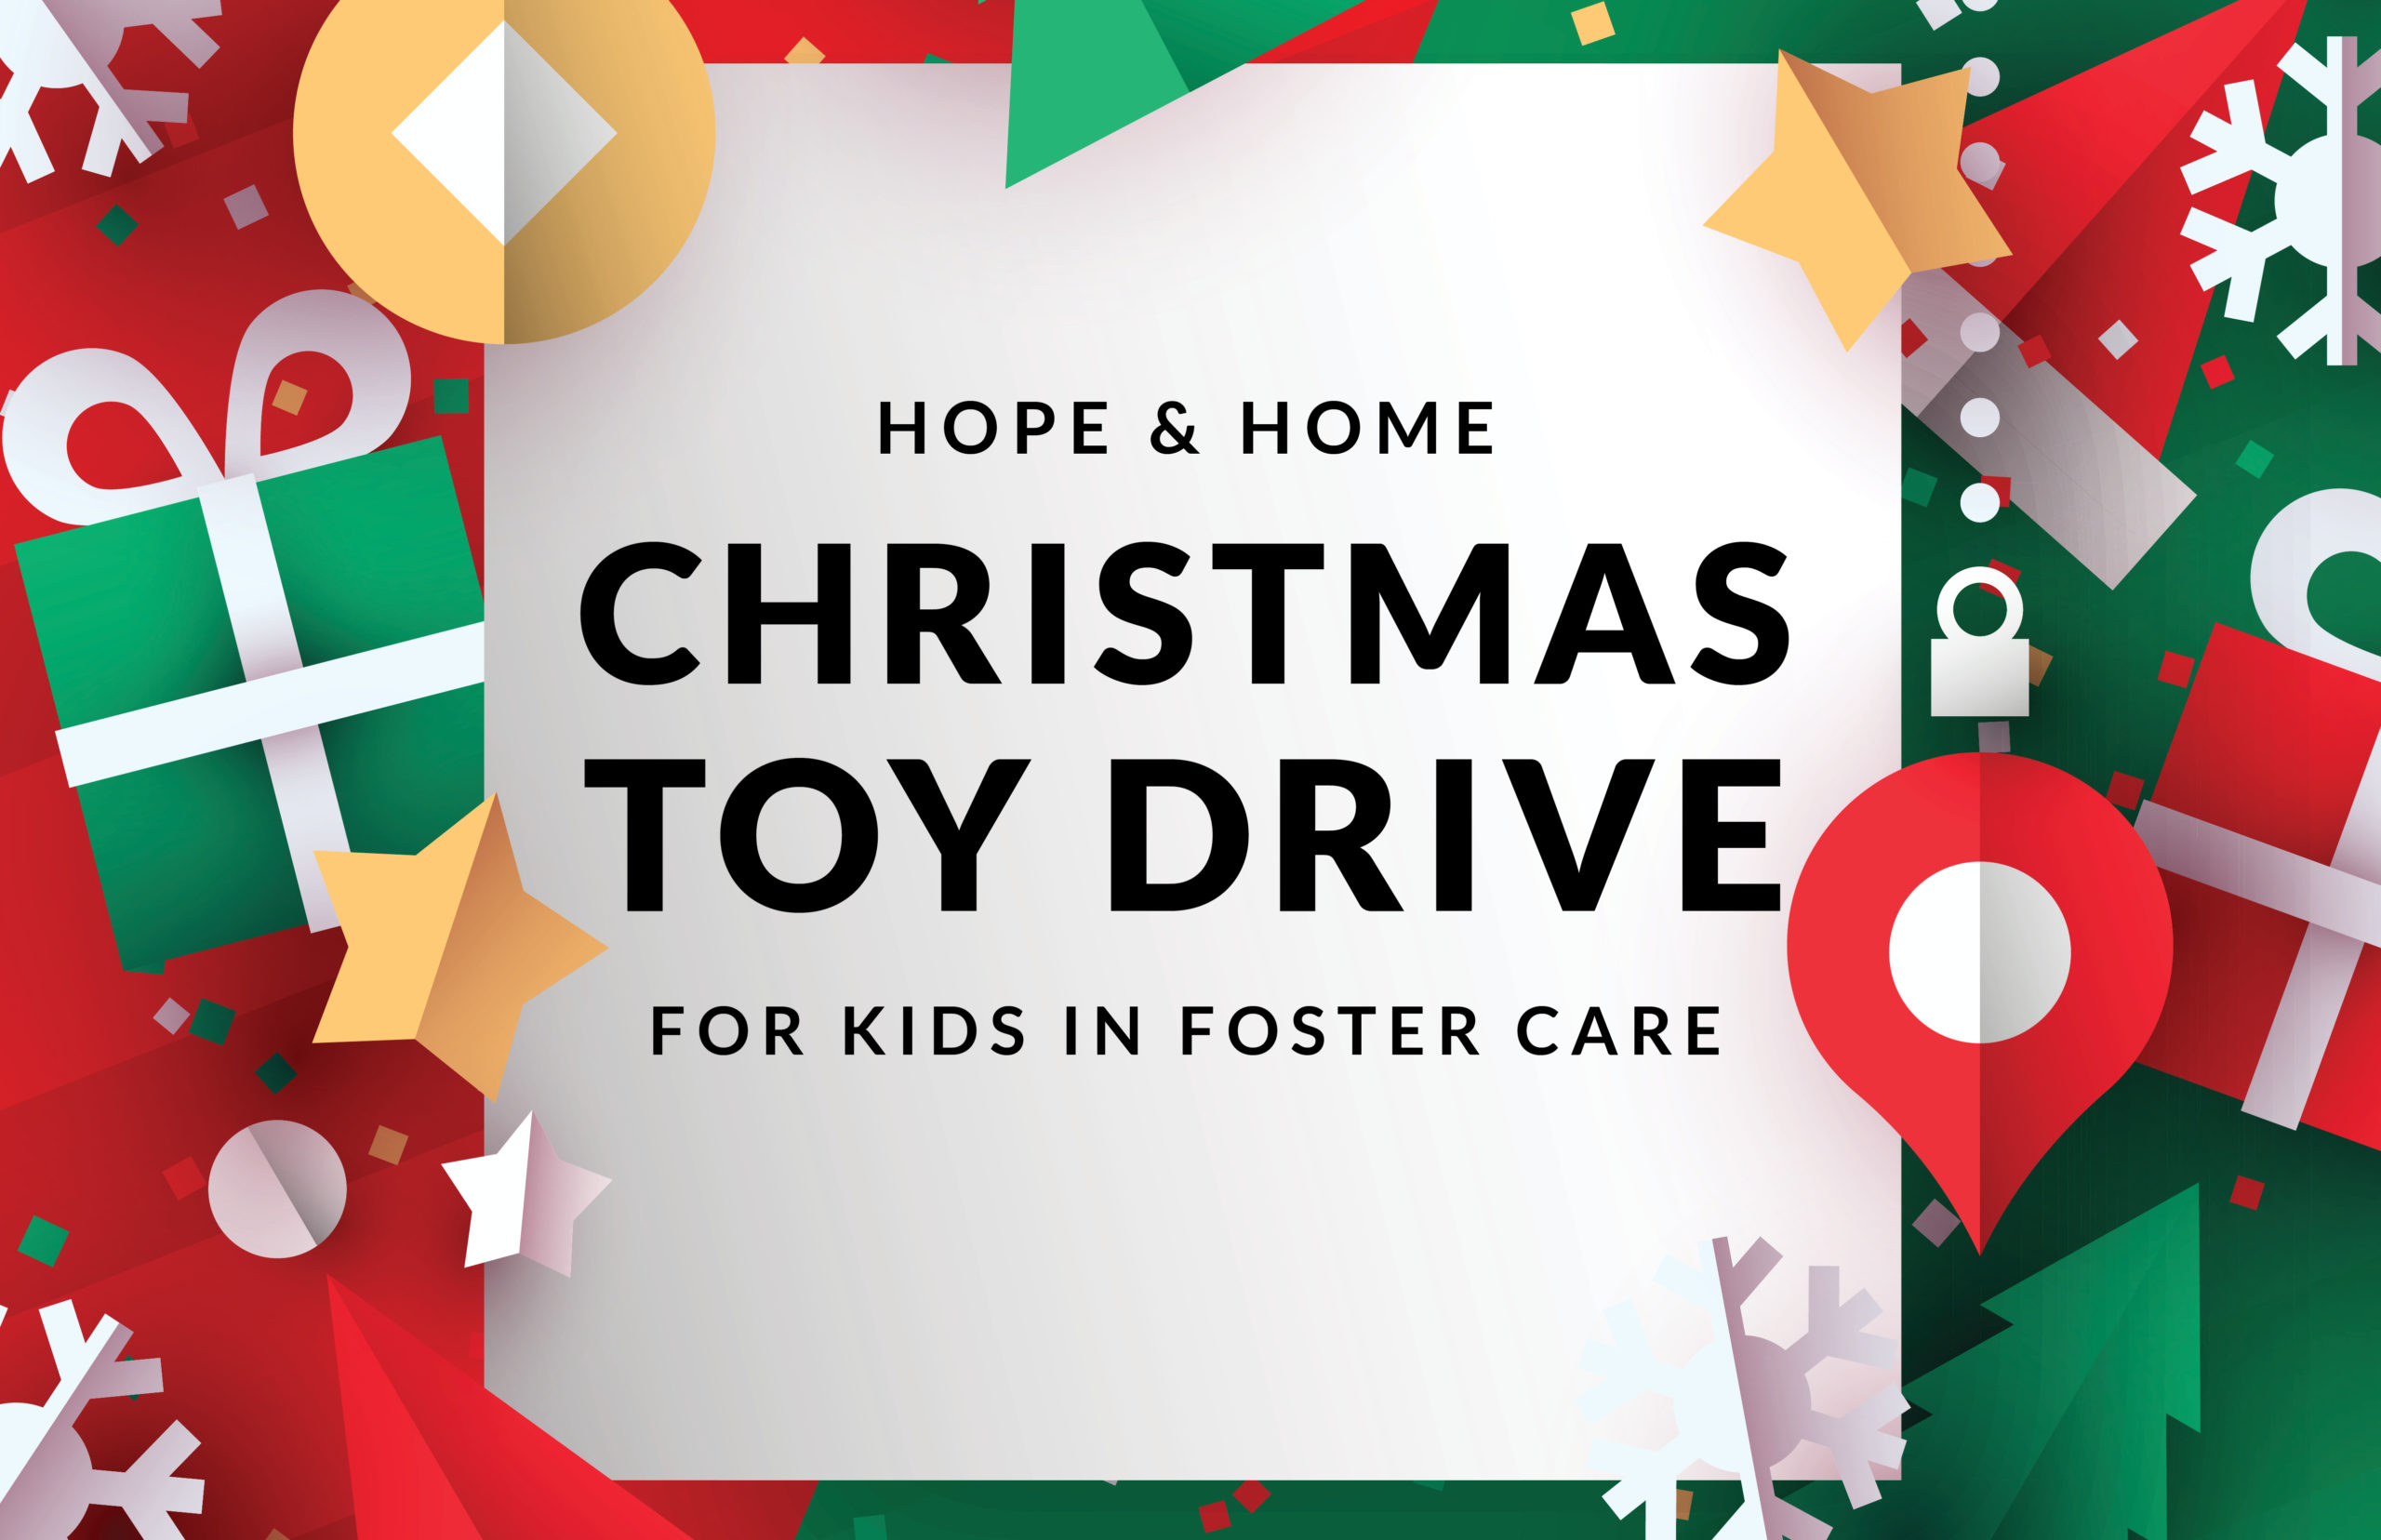 Hope & Home Christmas Toy Drive Pulpit Rock Church in Colorado Springs